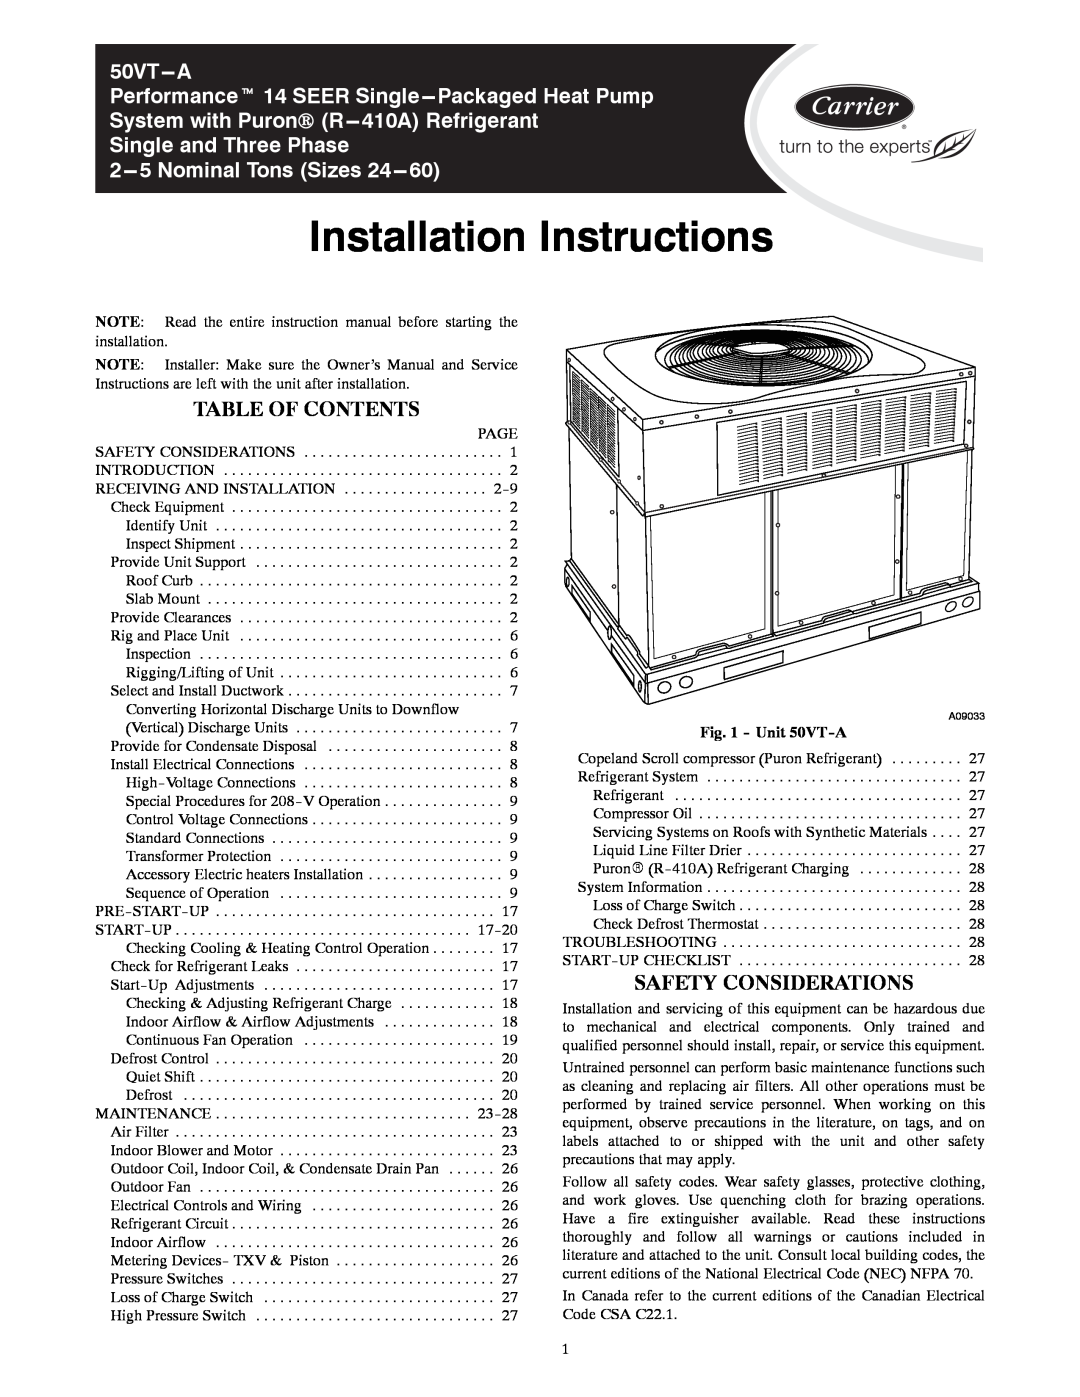 Carrier installation instructions Table Of Contents, Safety Considerations, Unit 50VT-A, Installation Instructions 